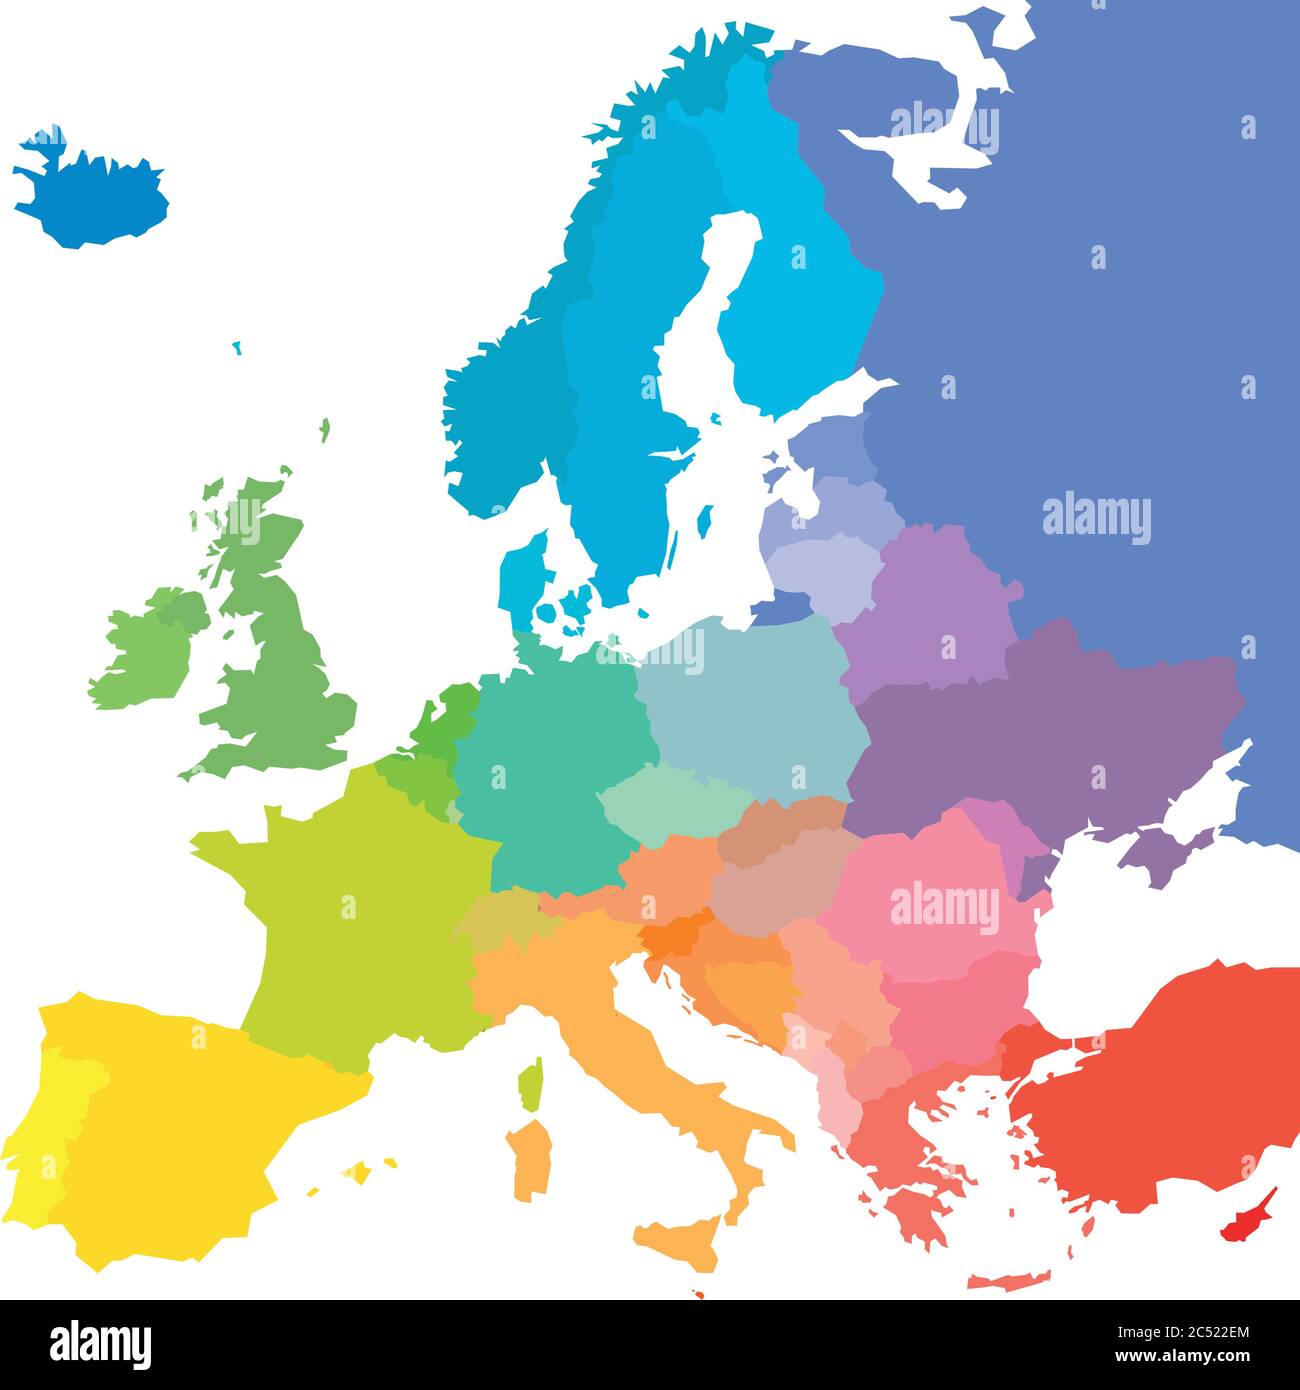 Map of Europe in colors of rainbow spectrum. With European countries names. Stock Vector